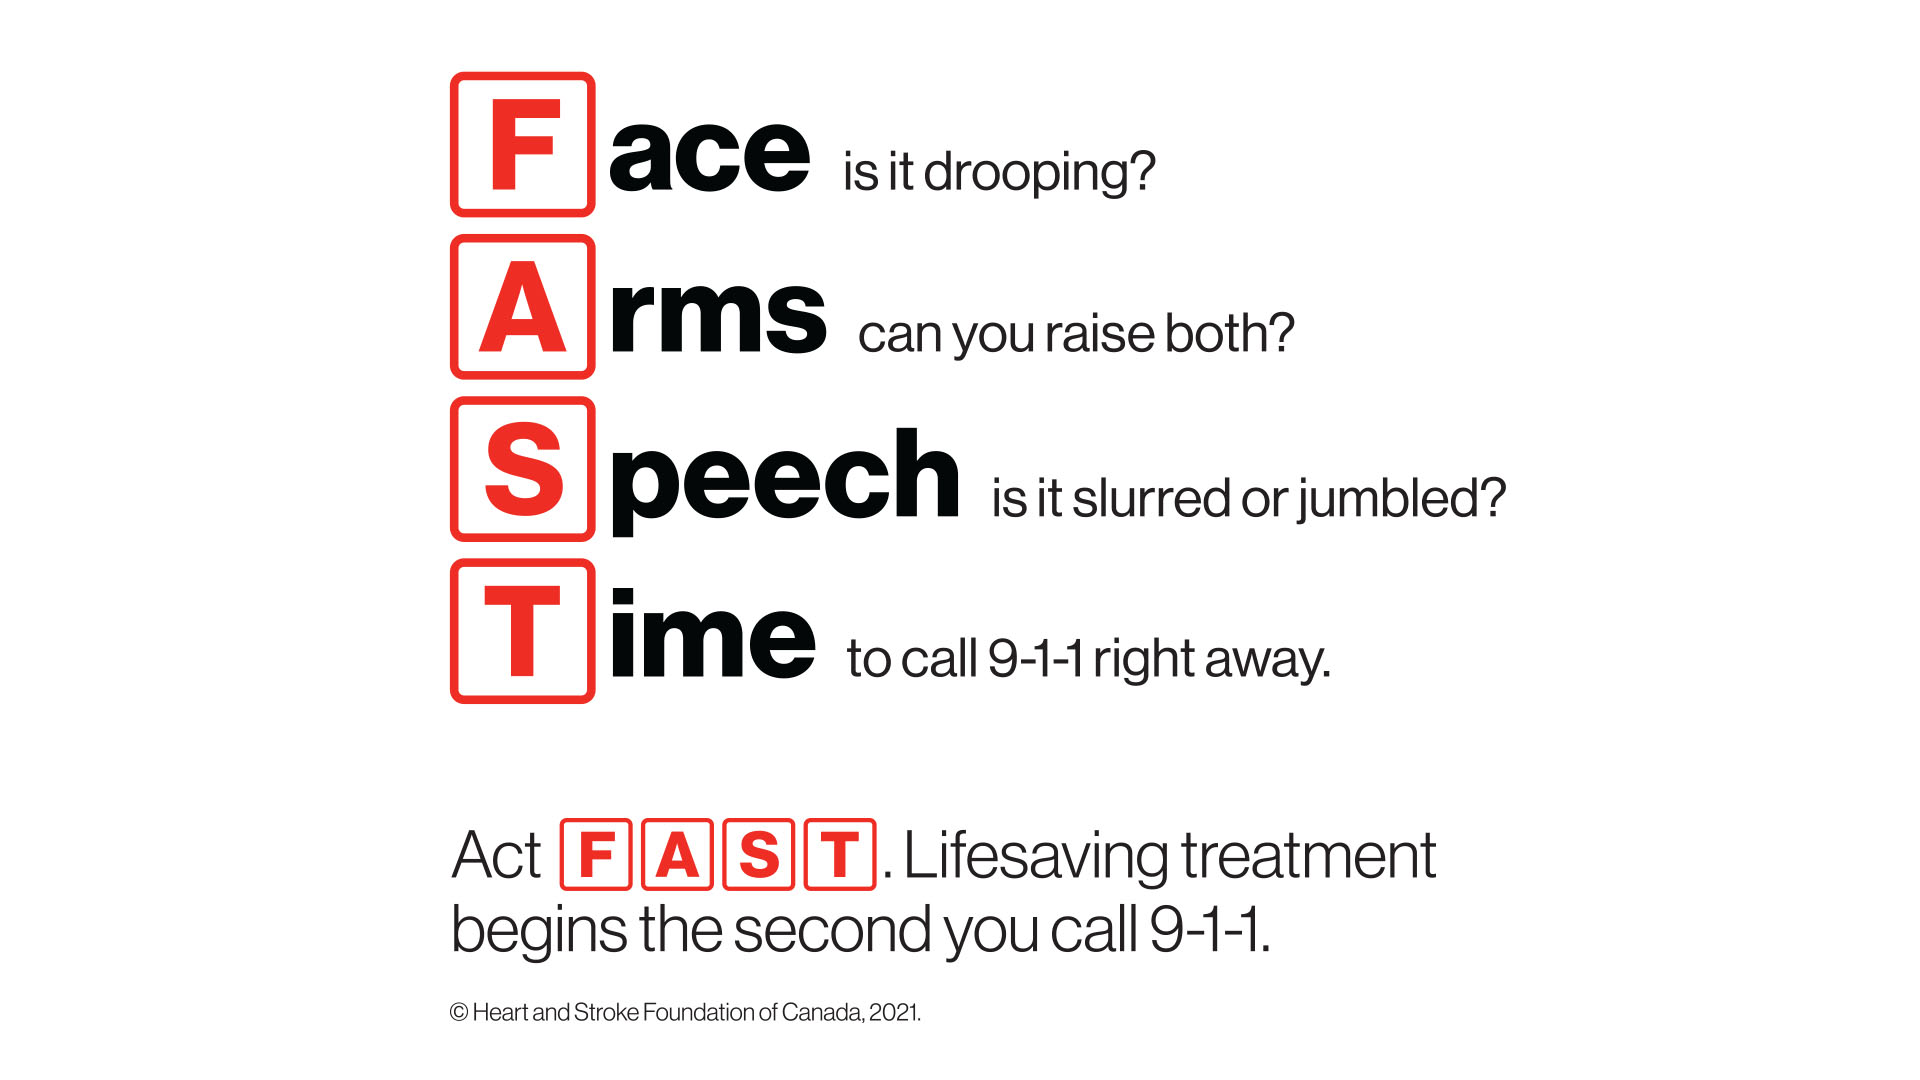 FAST: Signs of Stroke